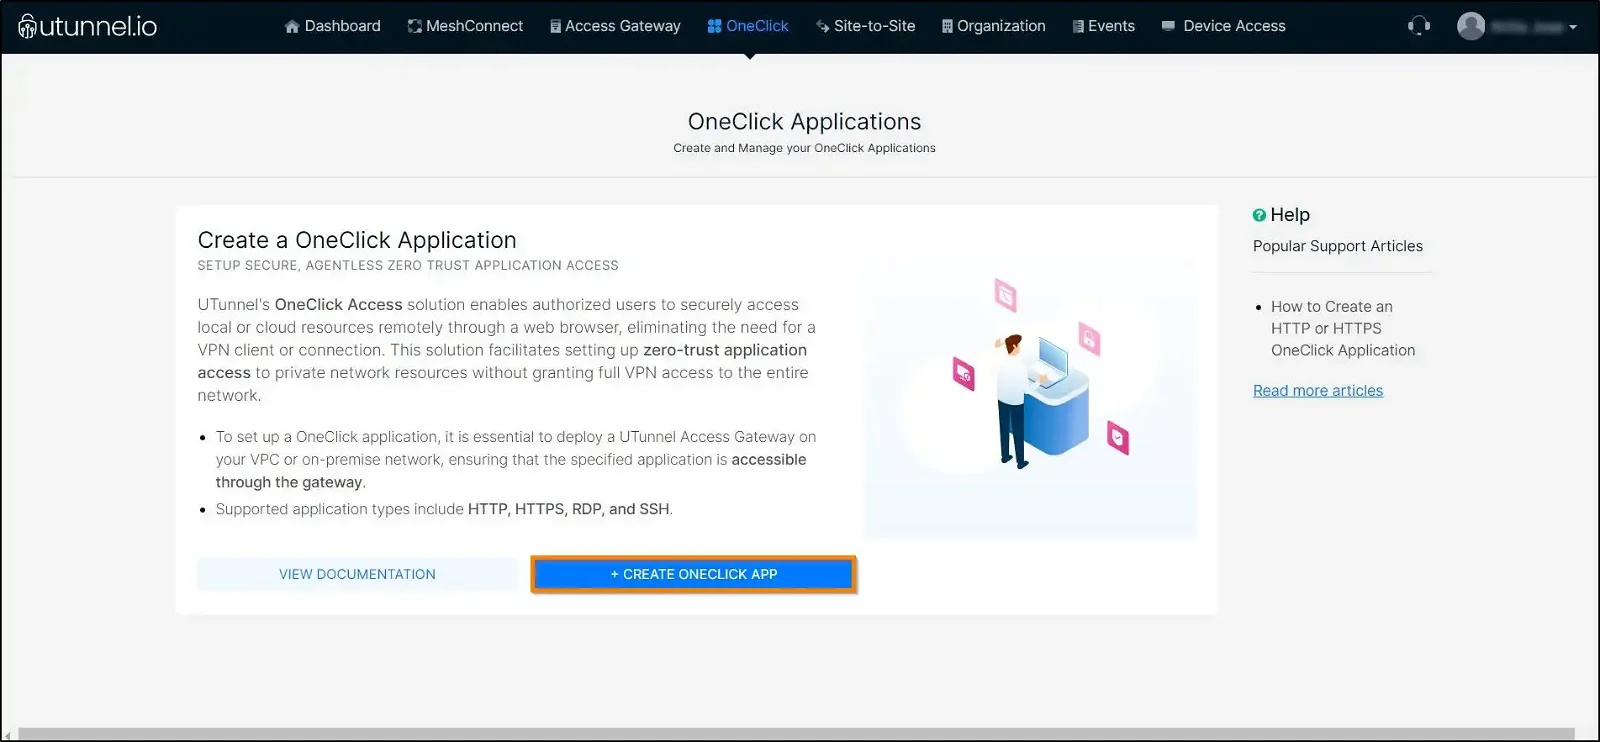 How to Create an HTTP or HTTPS OneClick Application create OneClick App